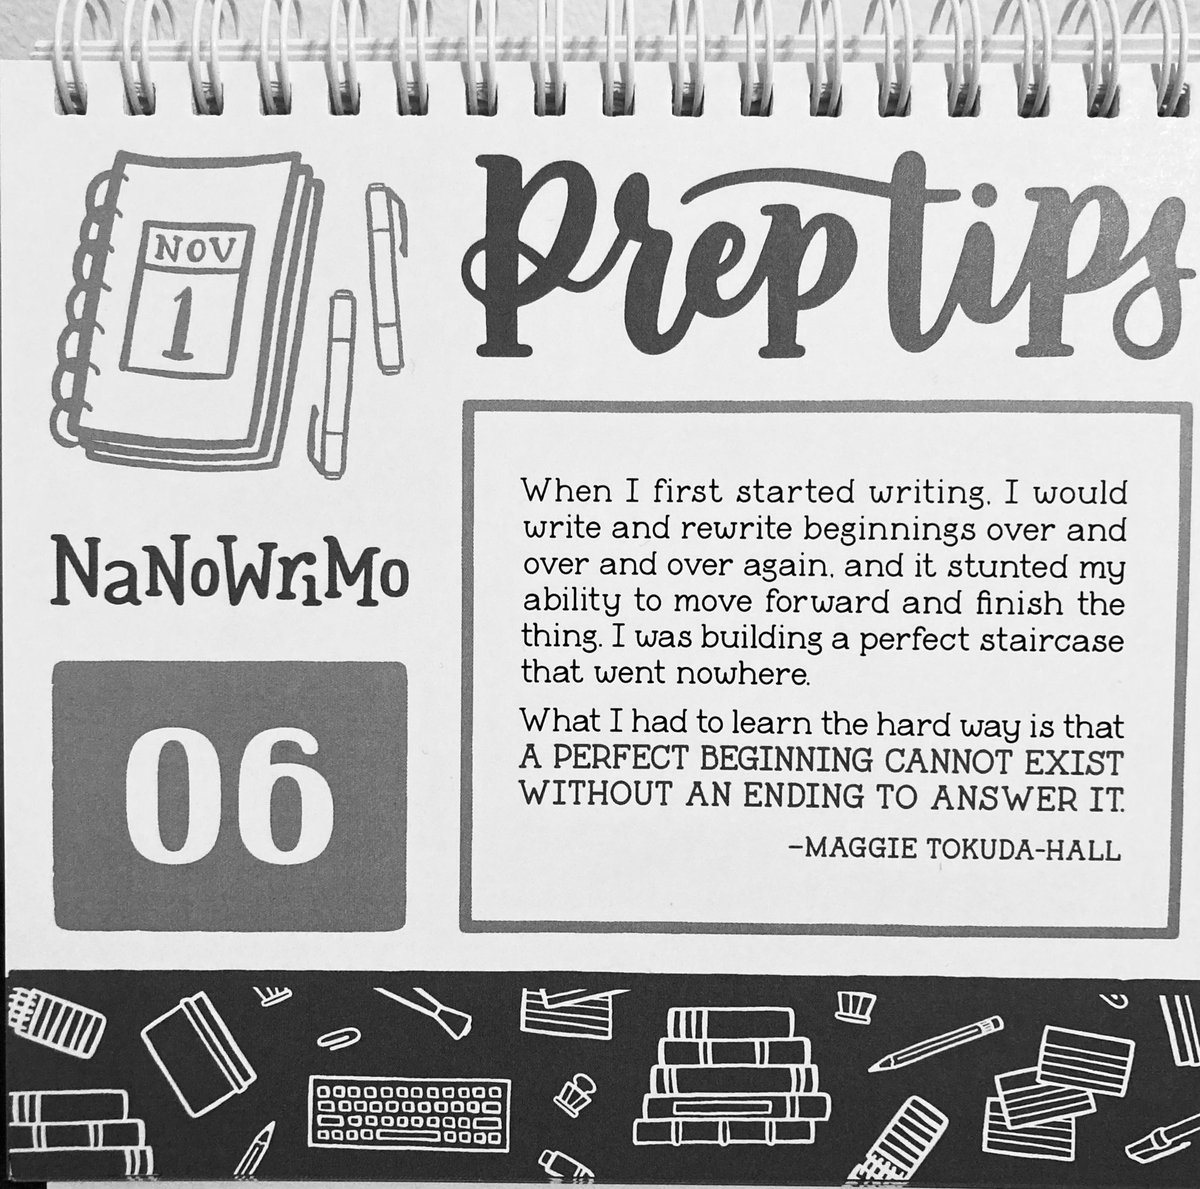 Took this #NaNoWriMo #PrepTips to heart and started with the ending. For the first time ever, I’ve written the ending in November! Now I just have to write my way back to it…